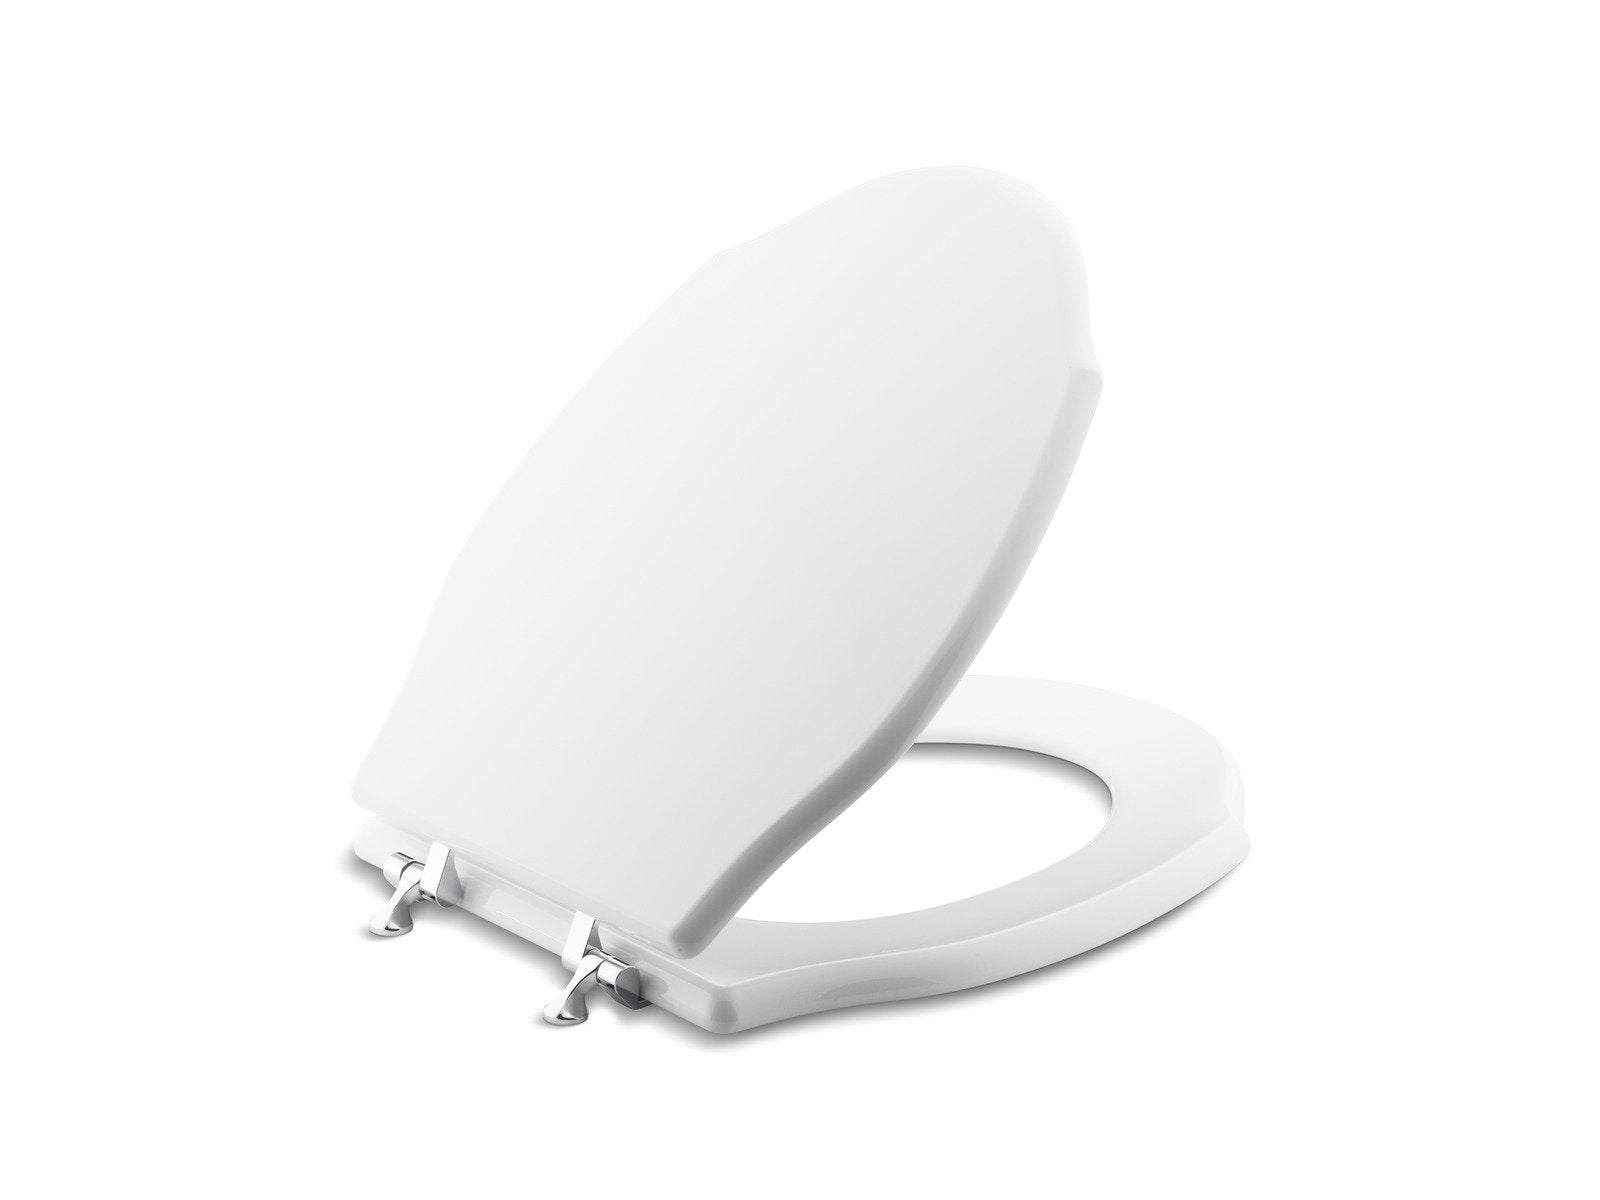 Kallista P70053-PB-0 Hampstead Colored Wood Toilet Seat, Elongated, with Polished Brass Trim